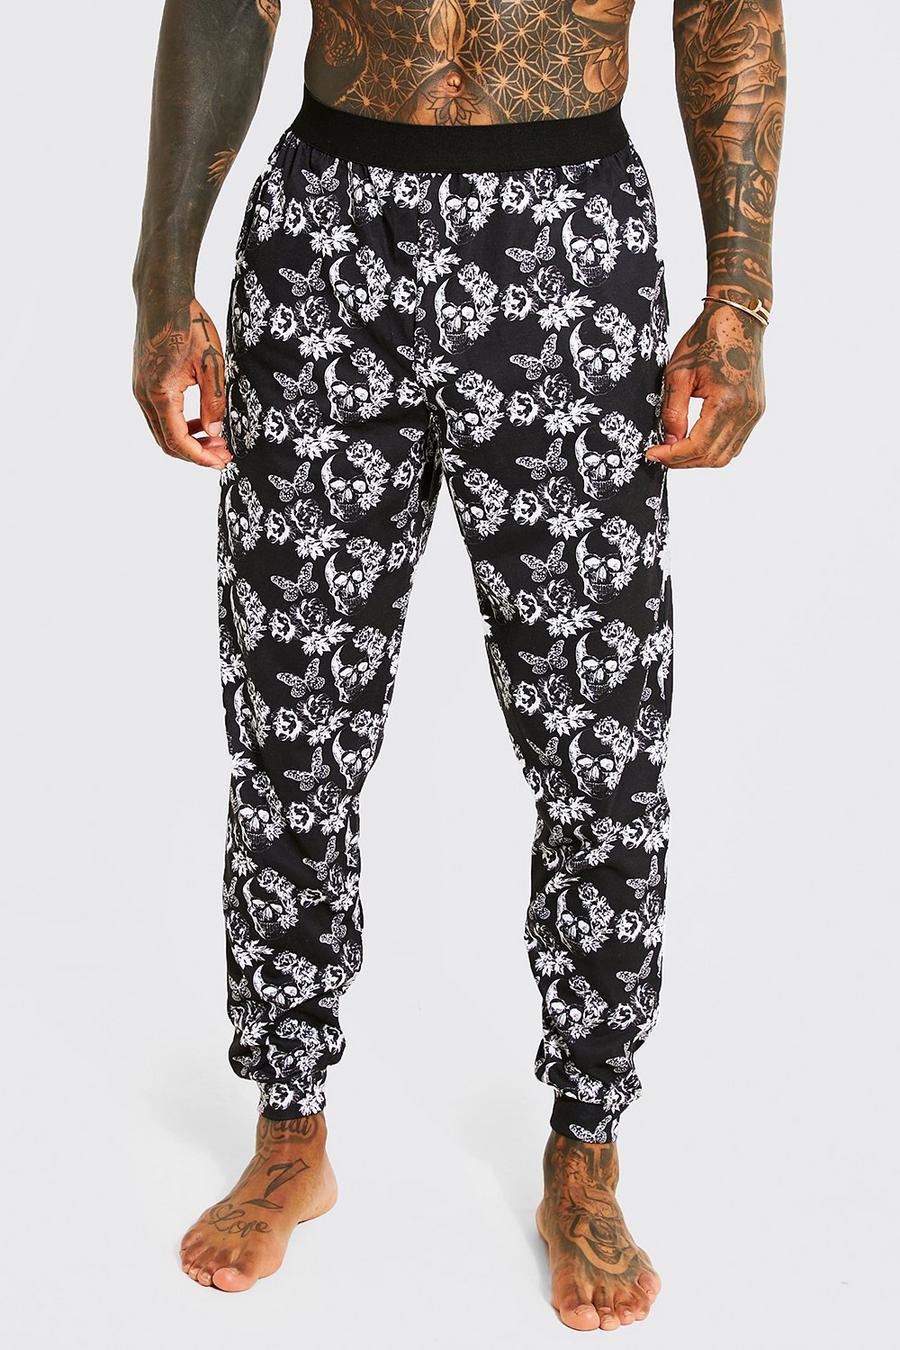 Black Skull And Roses All Over Loungewear Print